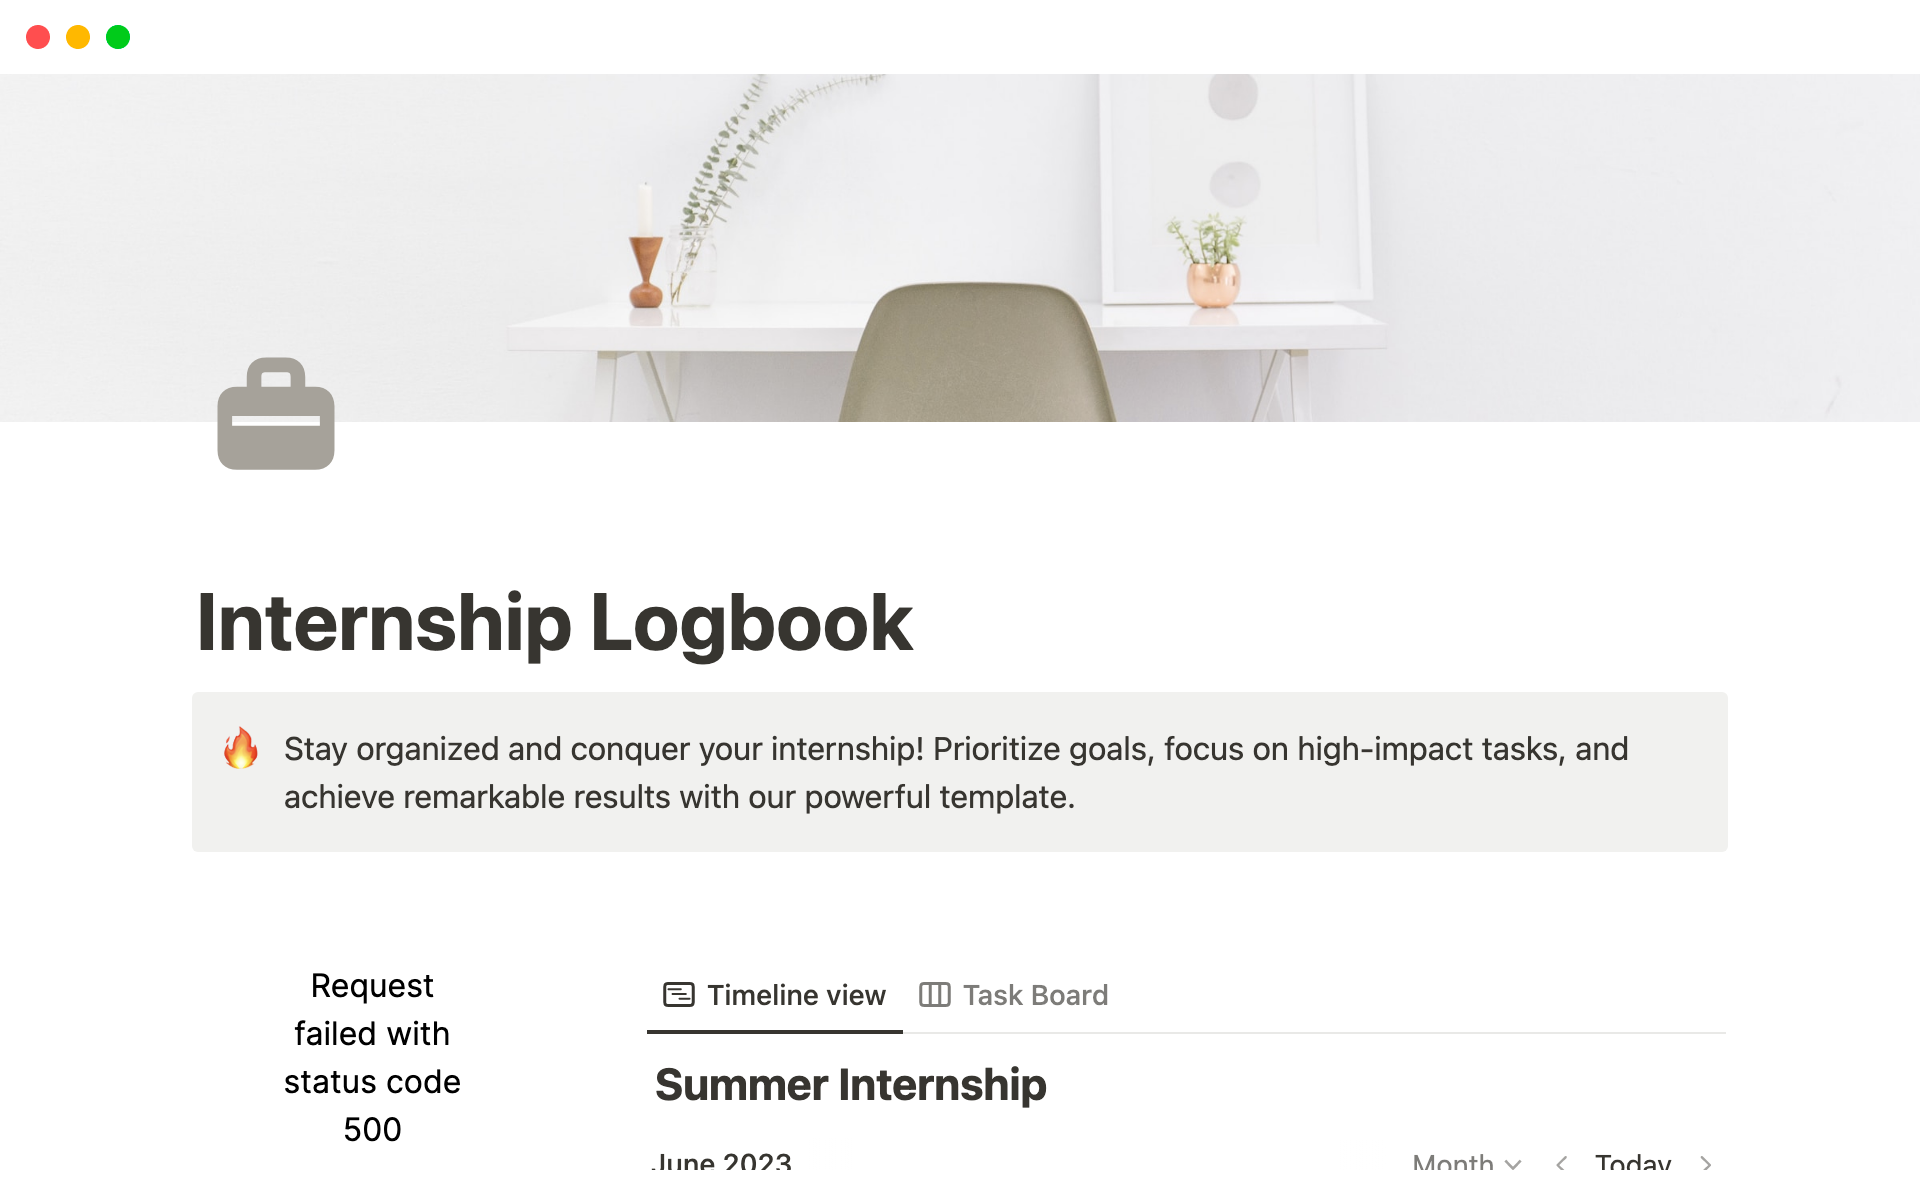 Stay organized and conquer your internship! Prioritize goals, focus on high-impact tasks, and achieve remarkable results with our powerful template.